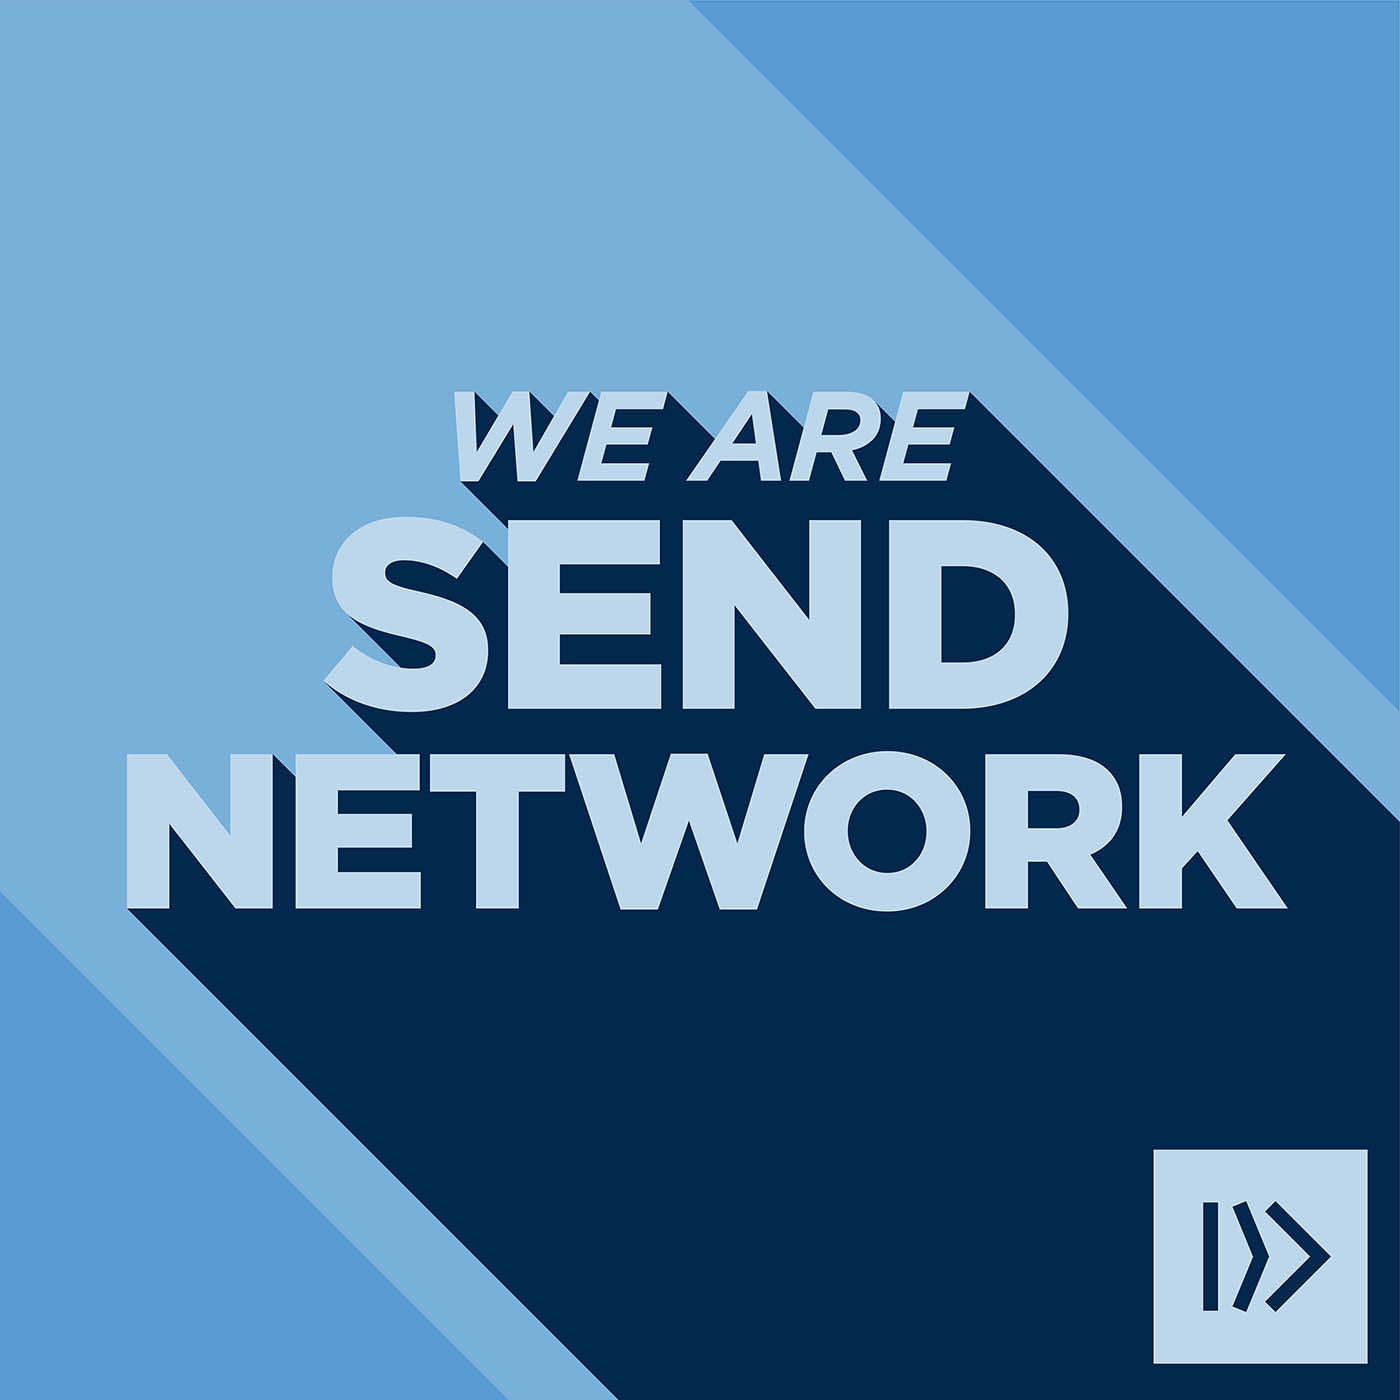 we_are_send_network_1400